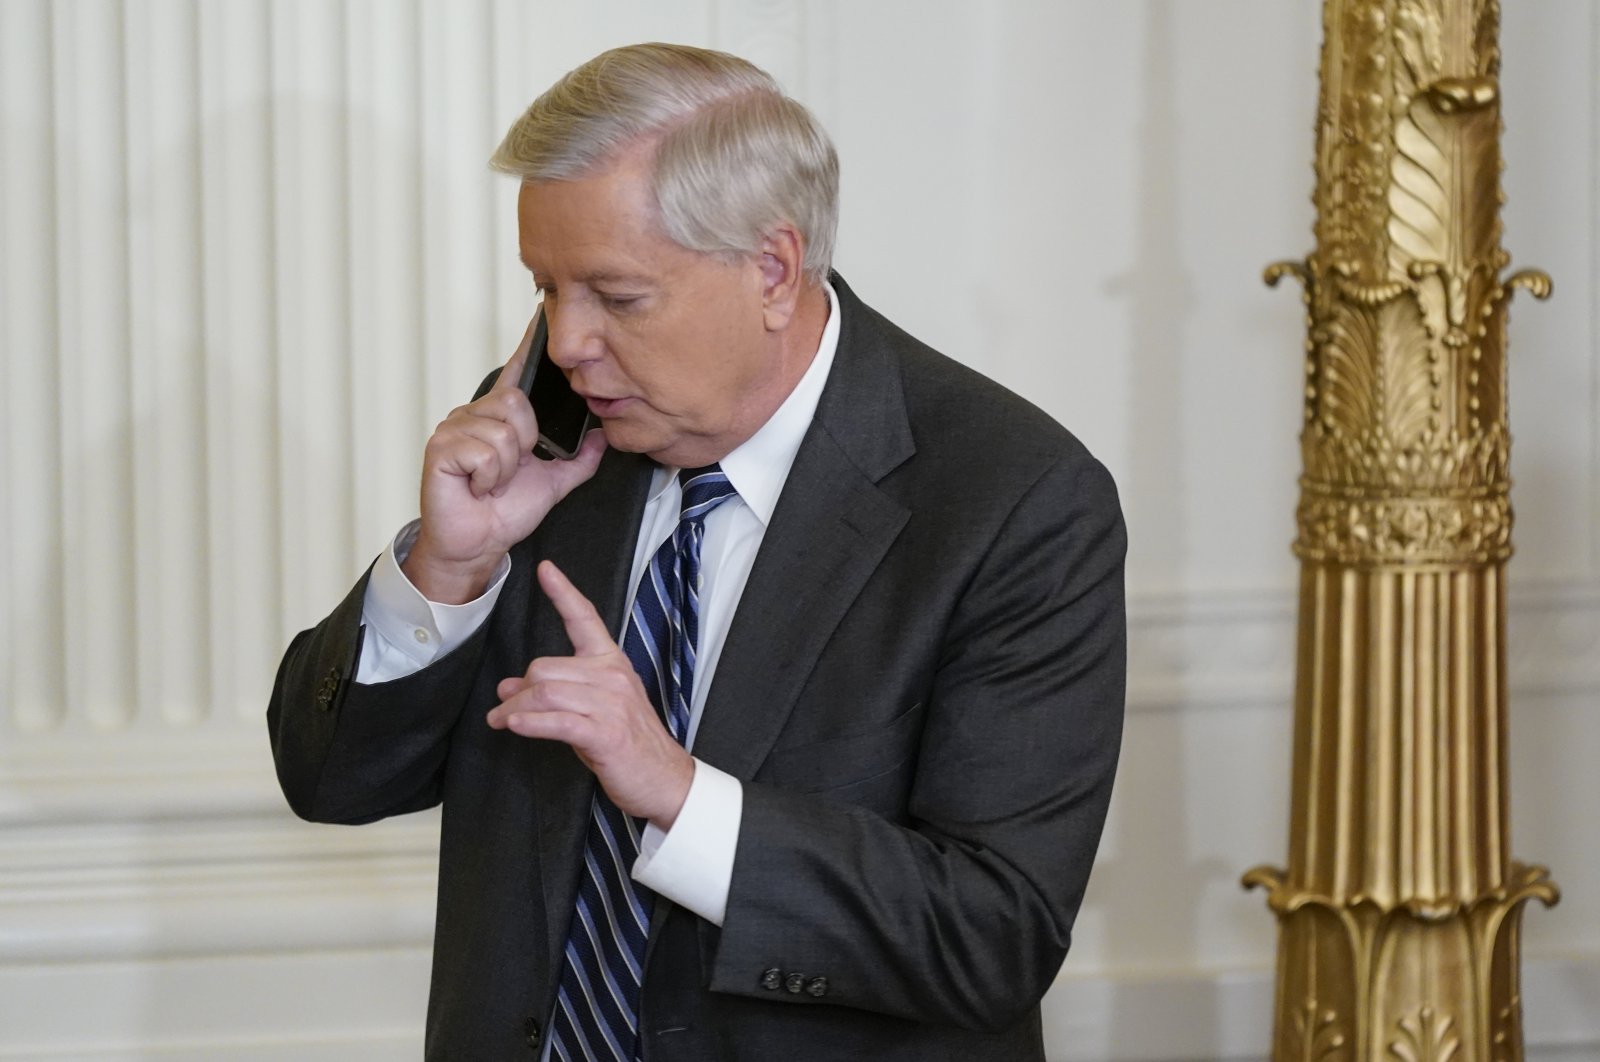 Sen. Lindsey Graham, R-S.C., talks on the phone in the East Room of the White House in Washington, U.S., March 3, 2022. (AP Photo)